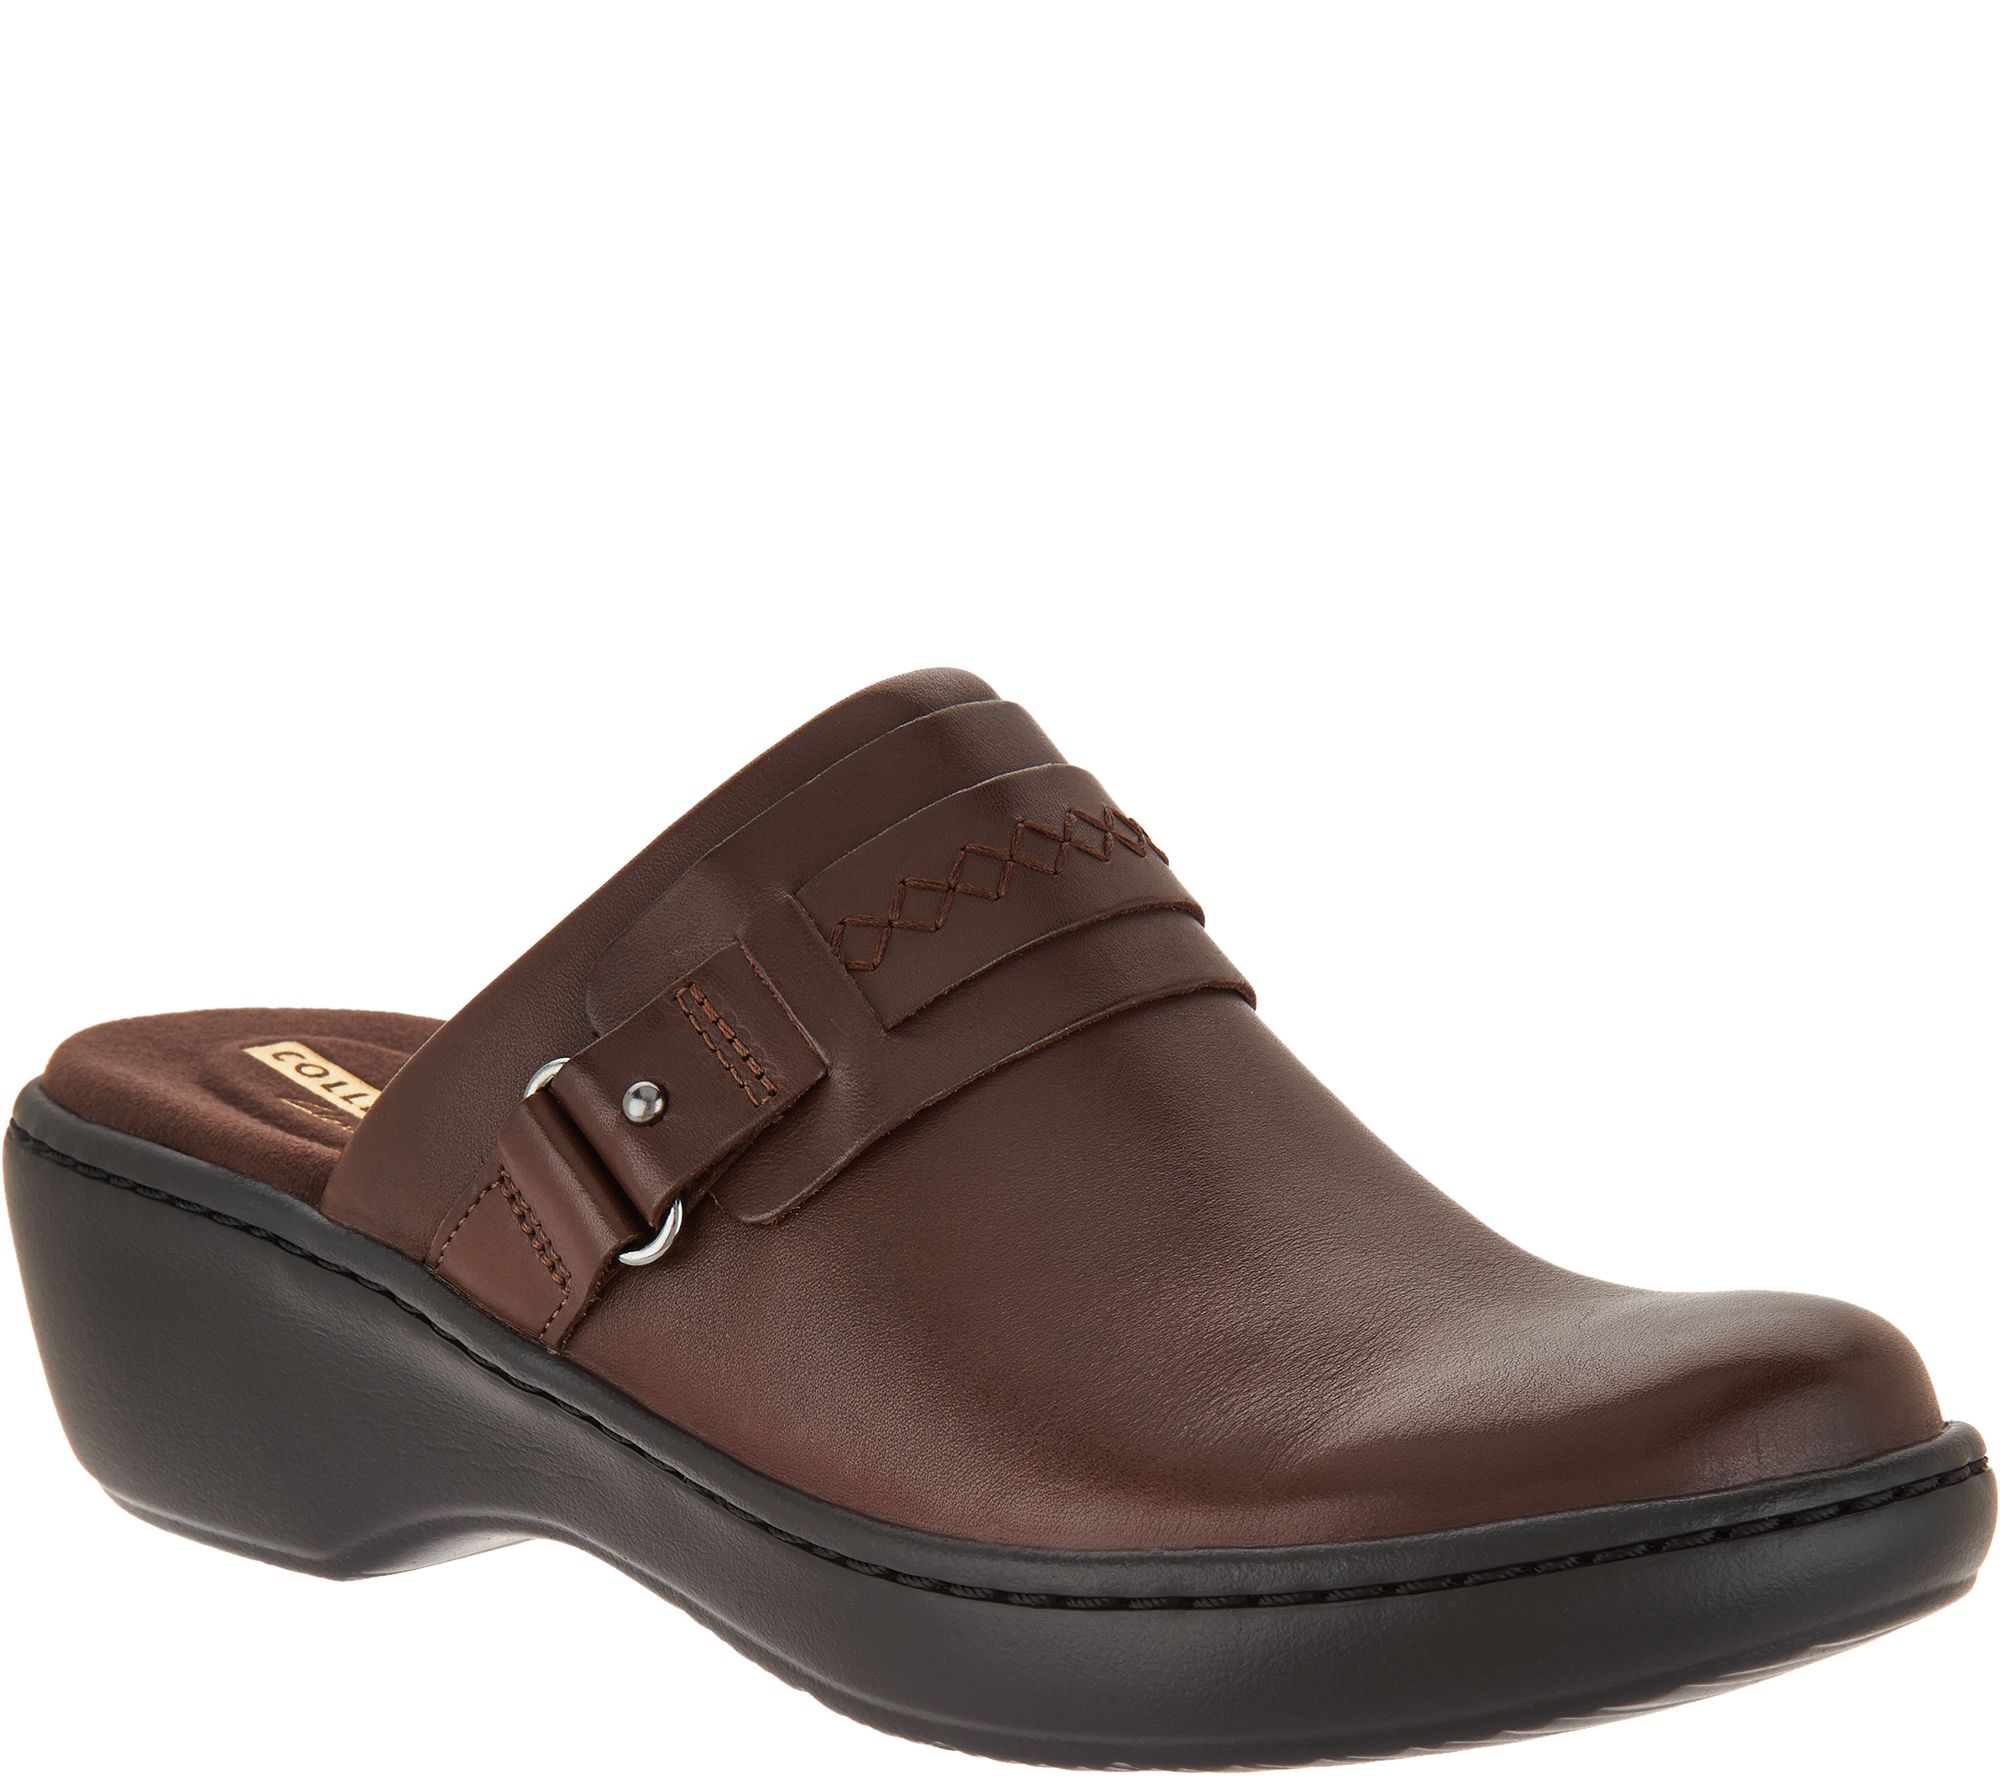 Clarks Collection Leather Clogs - Delana Amber - QVC.com